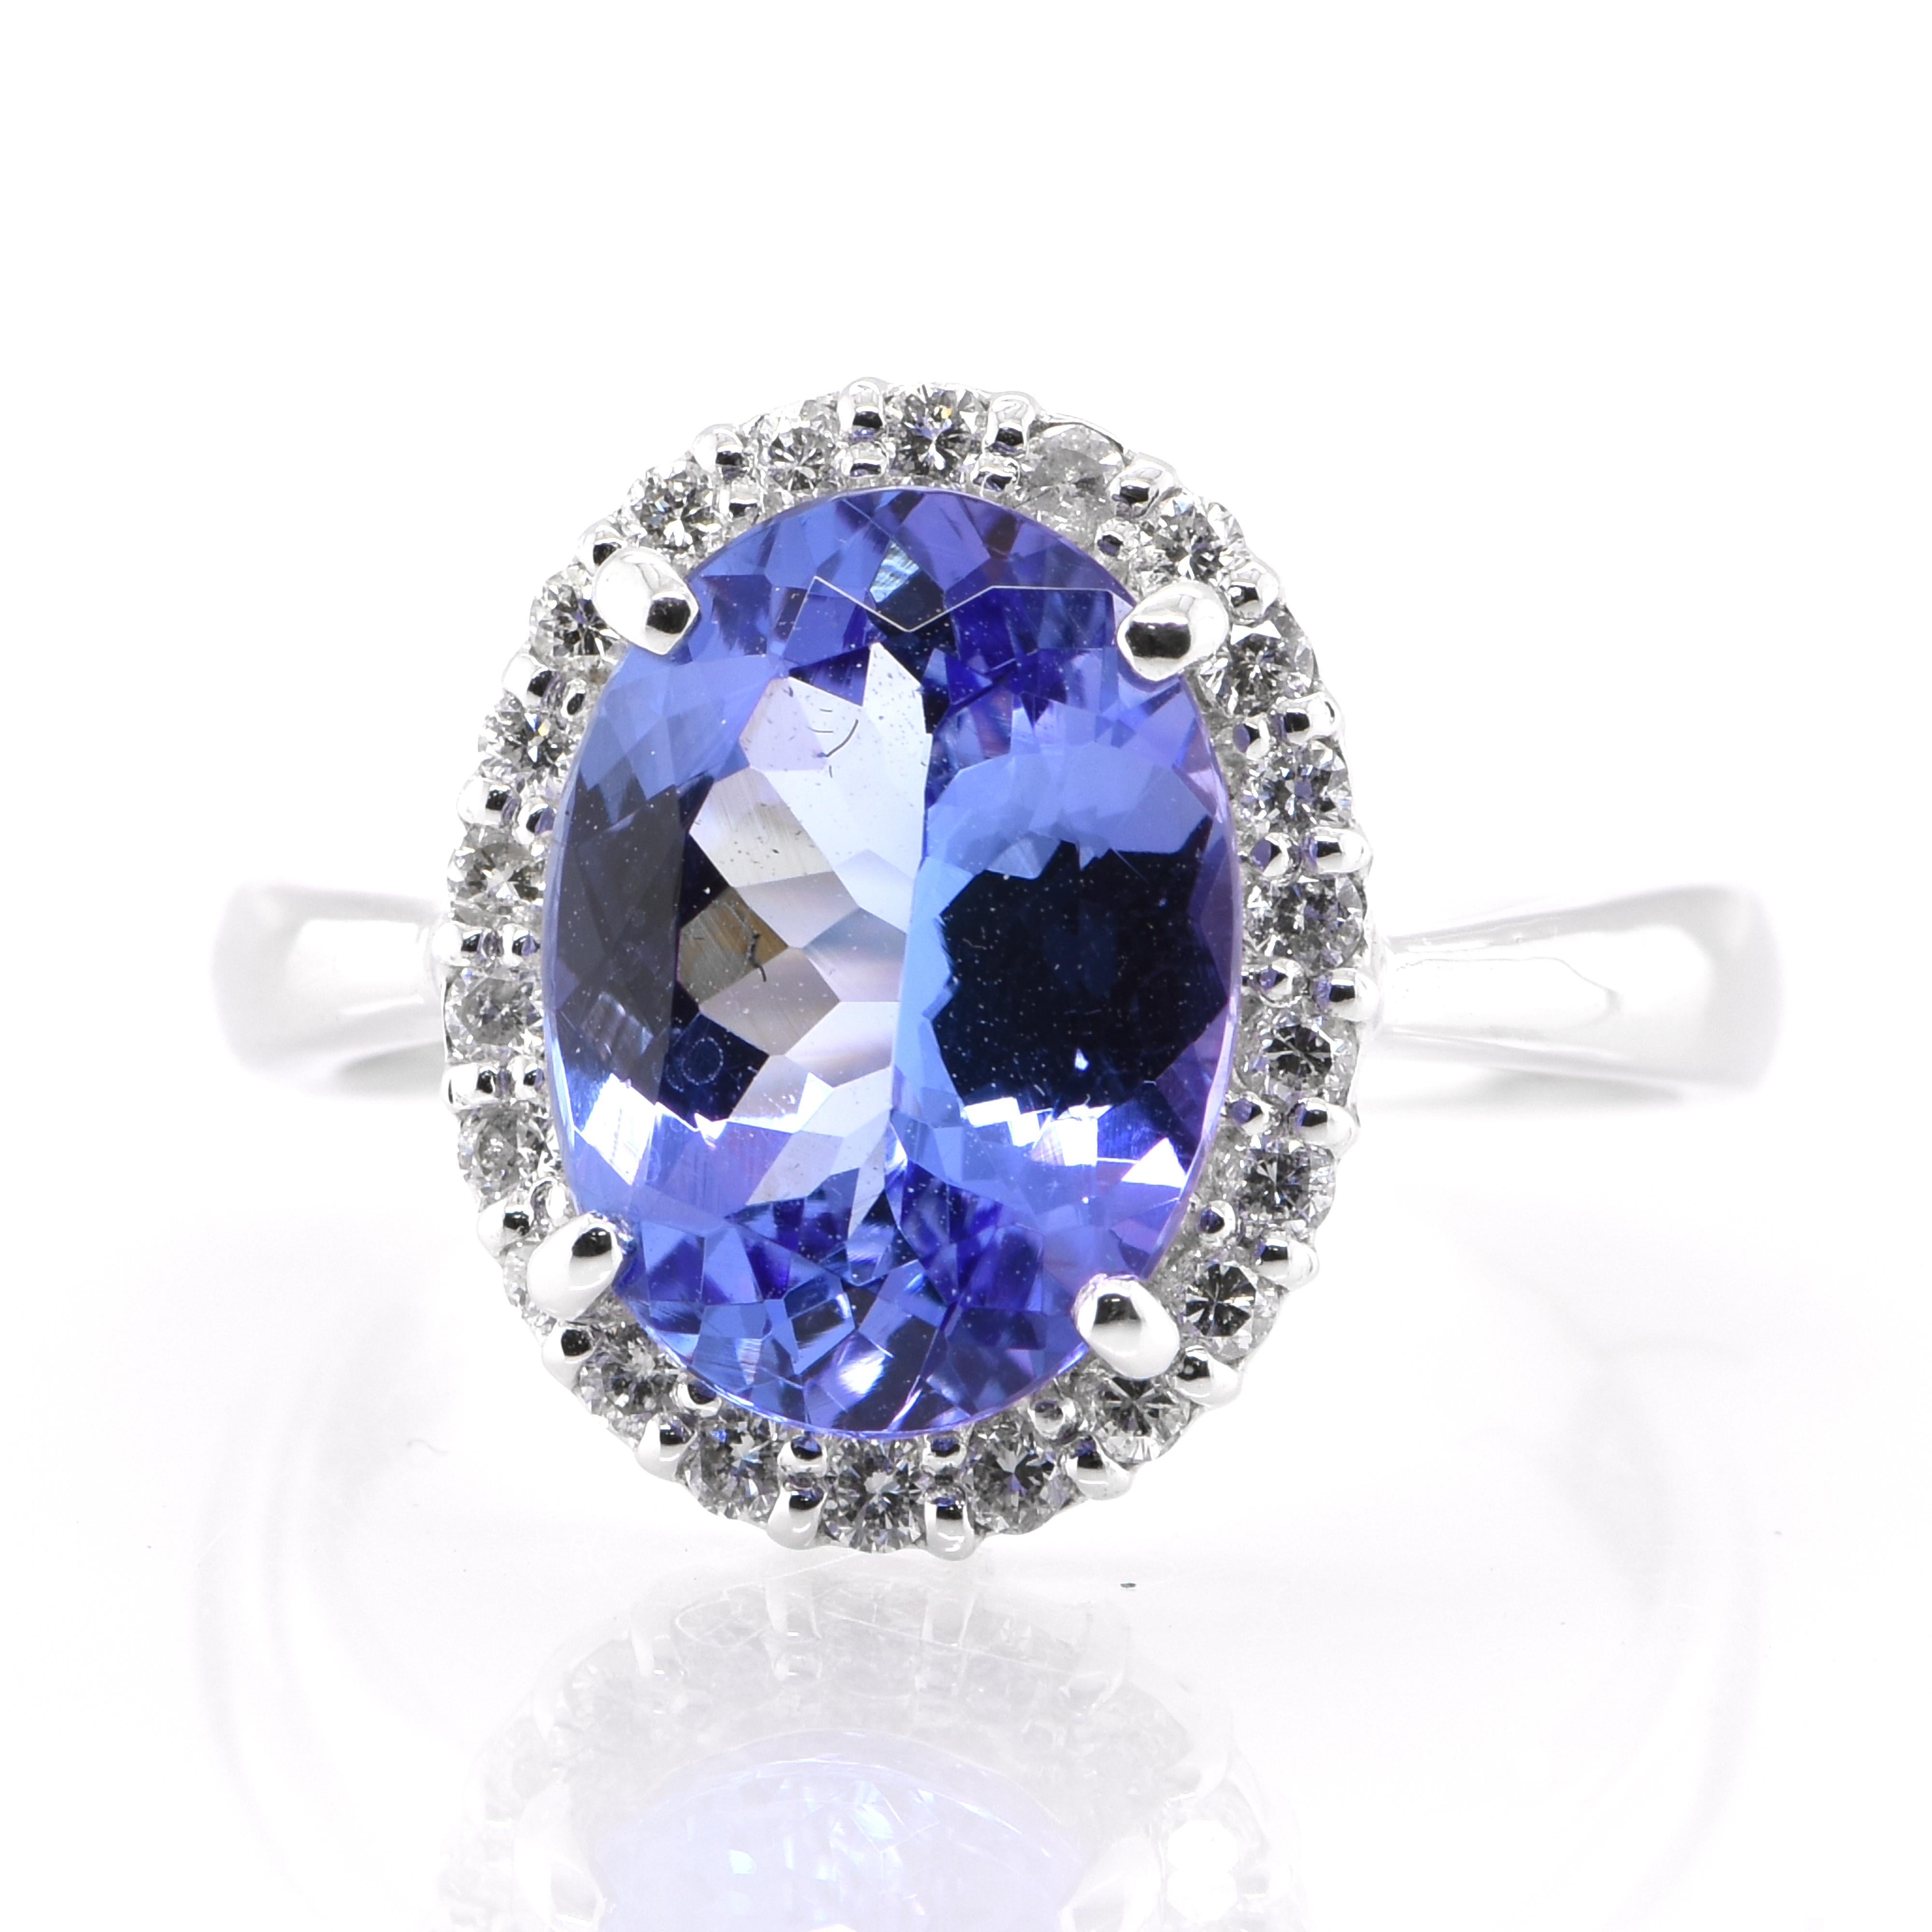 A beautiful ring featuring a 3.13 Carat Natural Tanzanite and 0.25 Carat Diamond Accents set in Platinum. Tanzanite's name was given by Tiffany and Co after its only known source: Tanzania. Tanzanite displays beautiful pleochroic colors meaning they